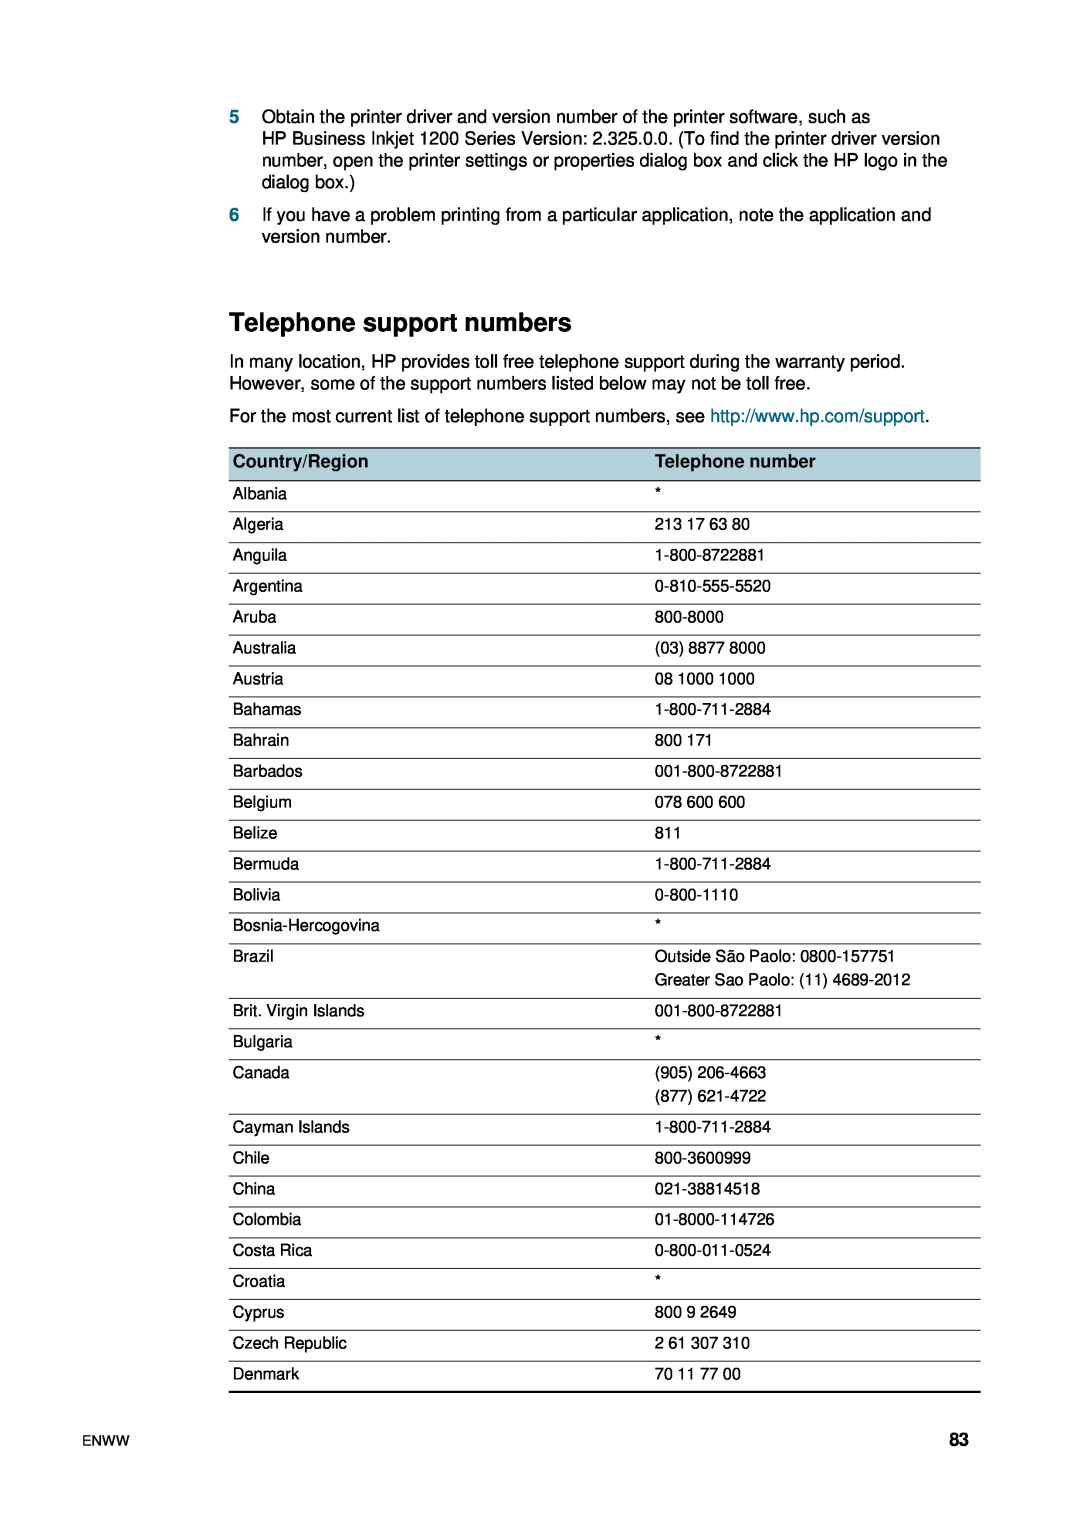 HP 1200 manual Telephone support numbers, Country/Region, Telephone number 